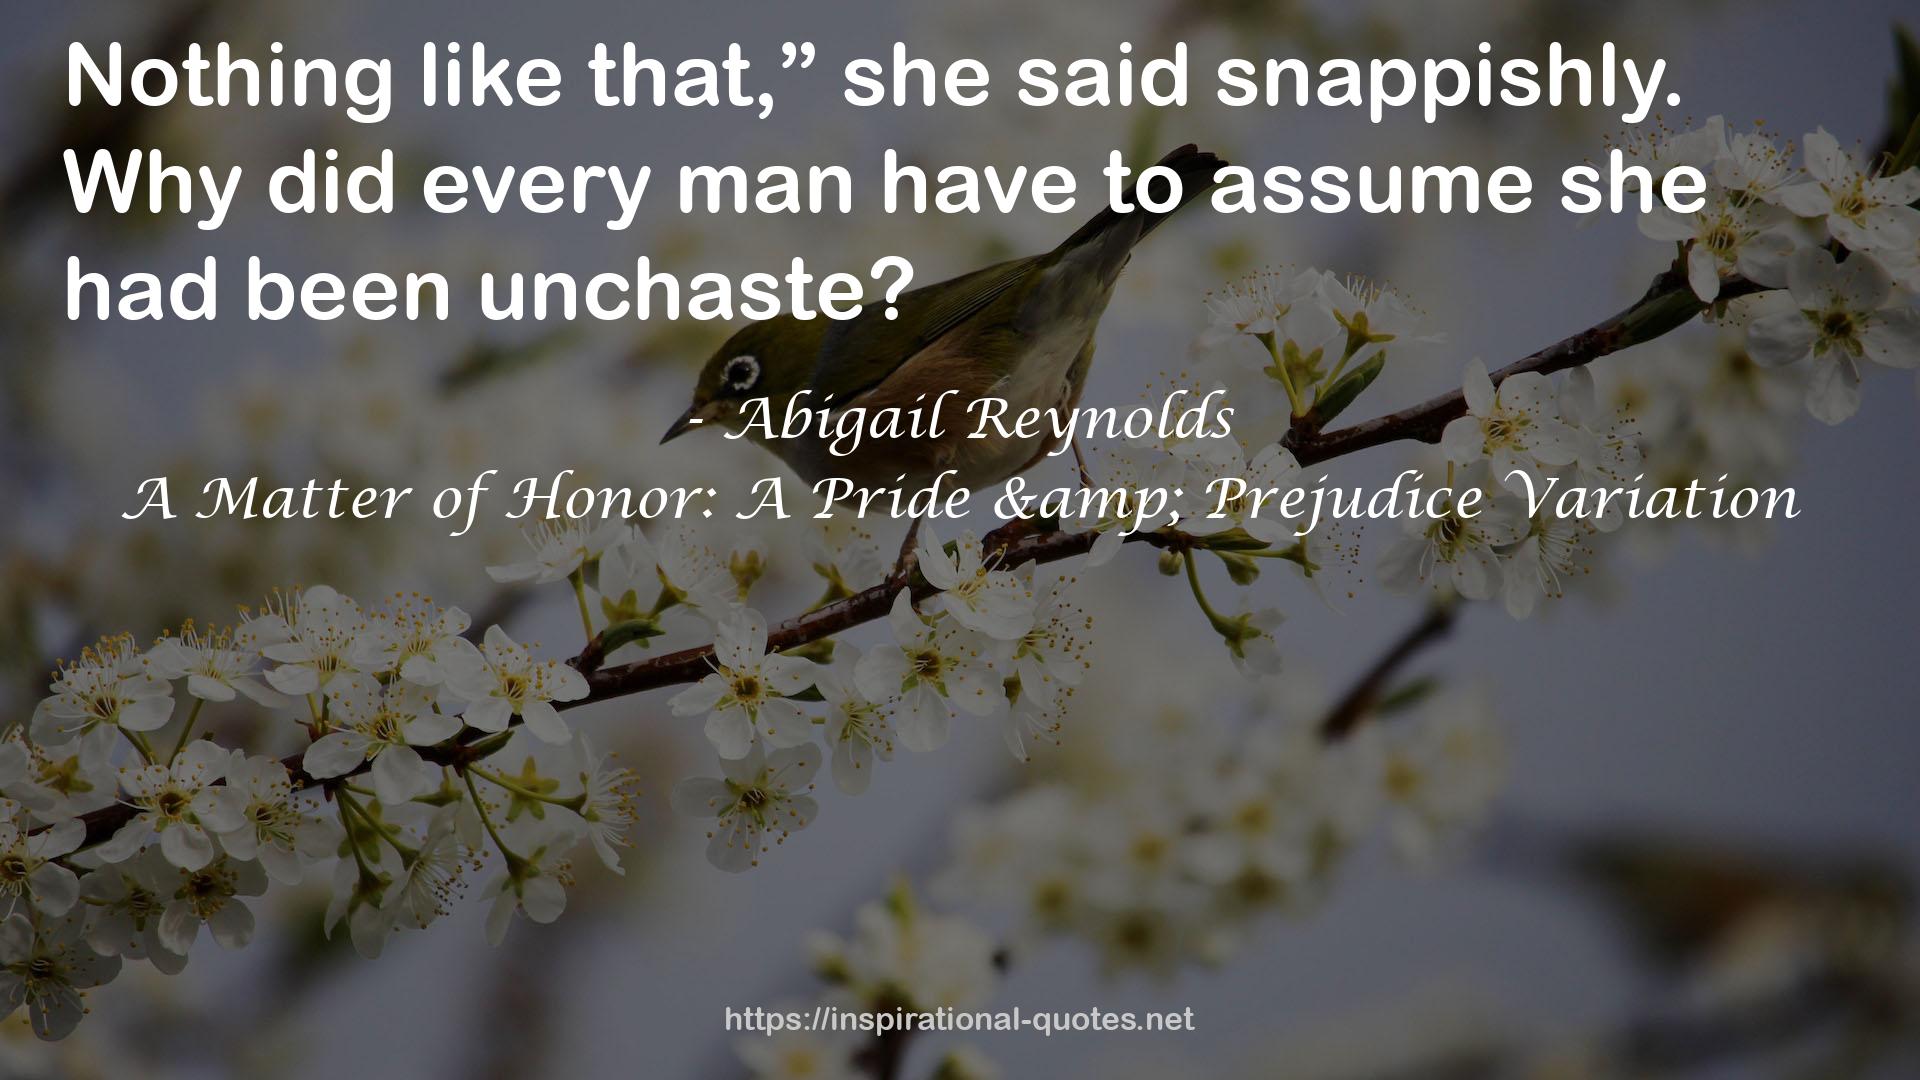 A Matter of Honor: A Pride & Prejudice Variation QUOTES